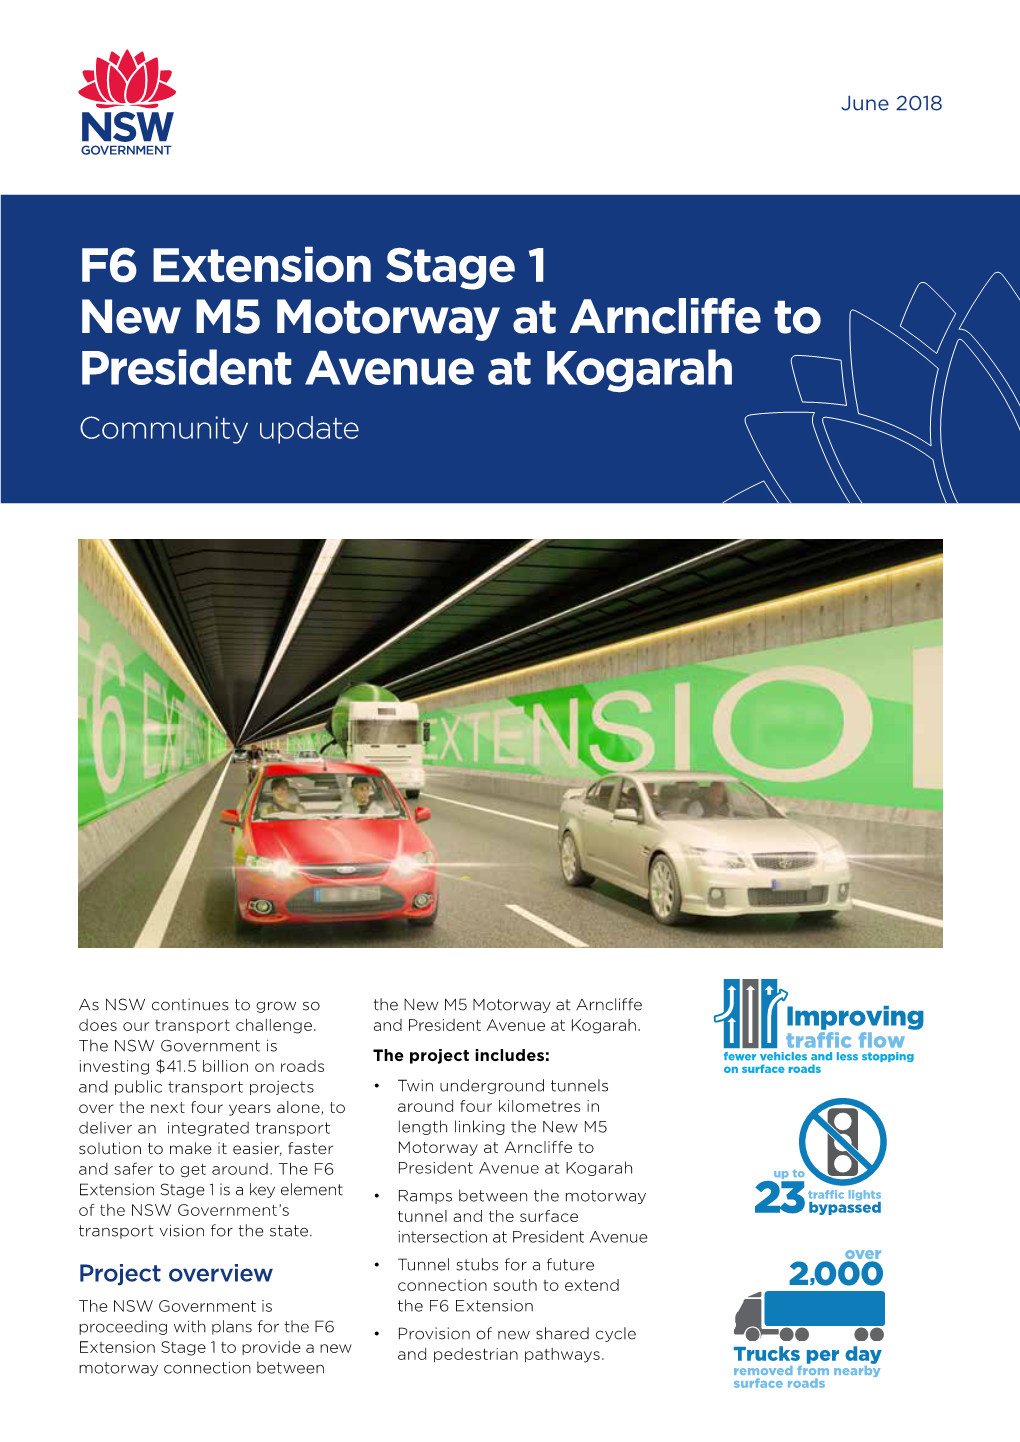 F6 Extension Stage 1 New M5 Motorway at Arncliffe to President Avenue at Kogarah Community Update